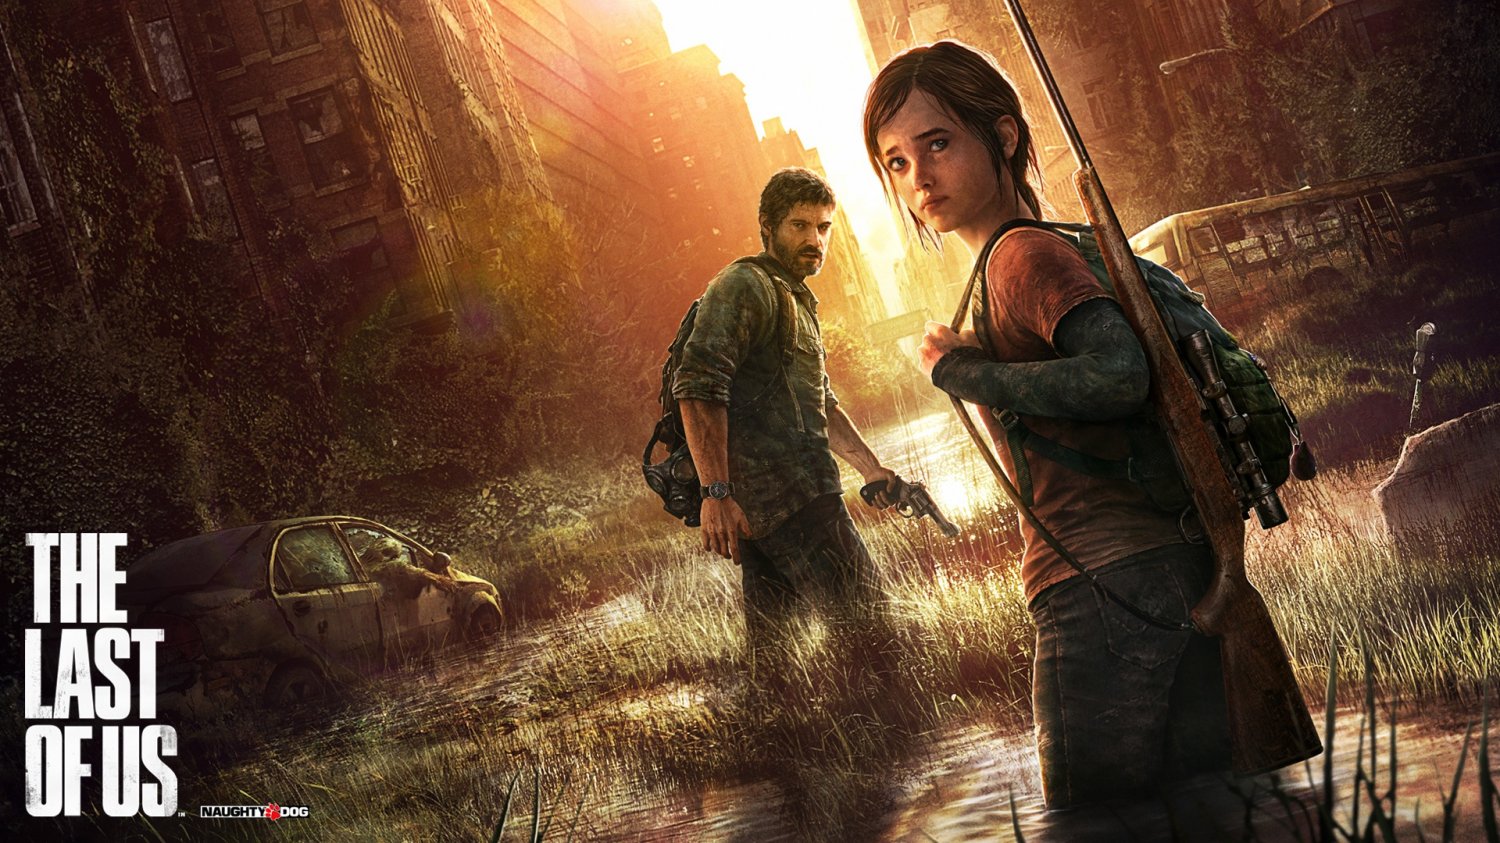 The Last of Us Ellie and Joel Bella Ramsey and Pedro Pascal 18"x28" (45cm/70cm) Poster